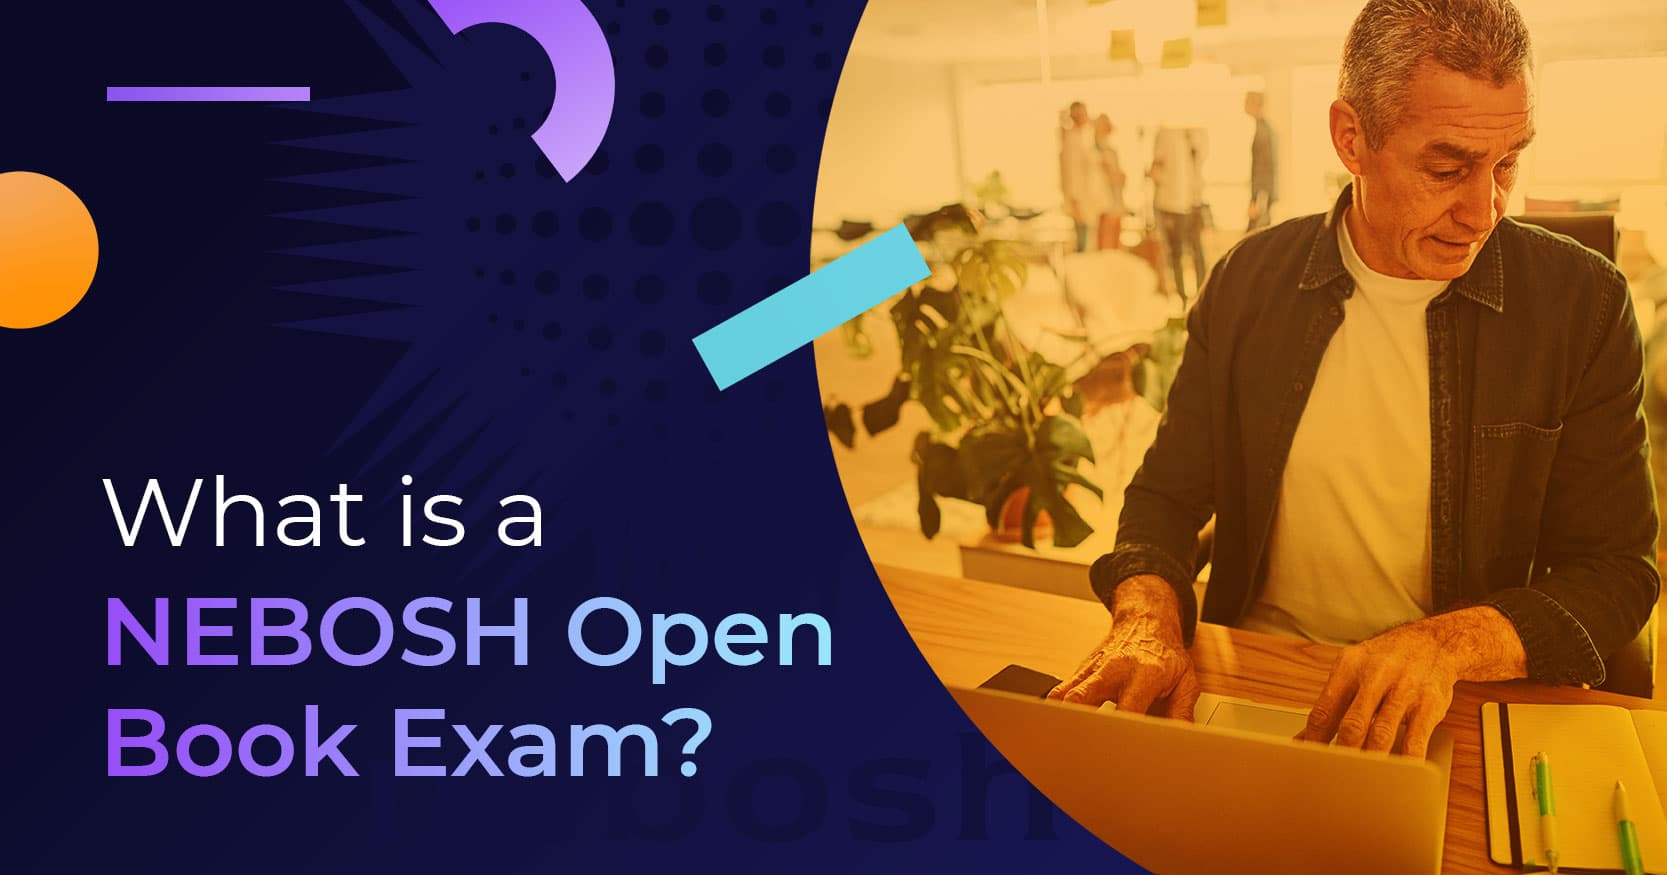 What is the NEBOSH Open Book Exam? Image